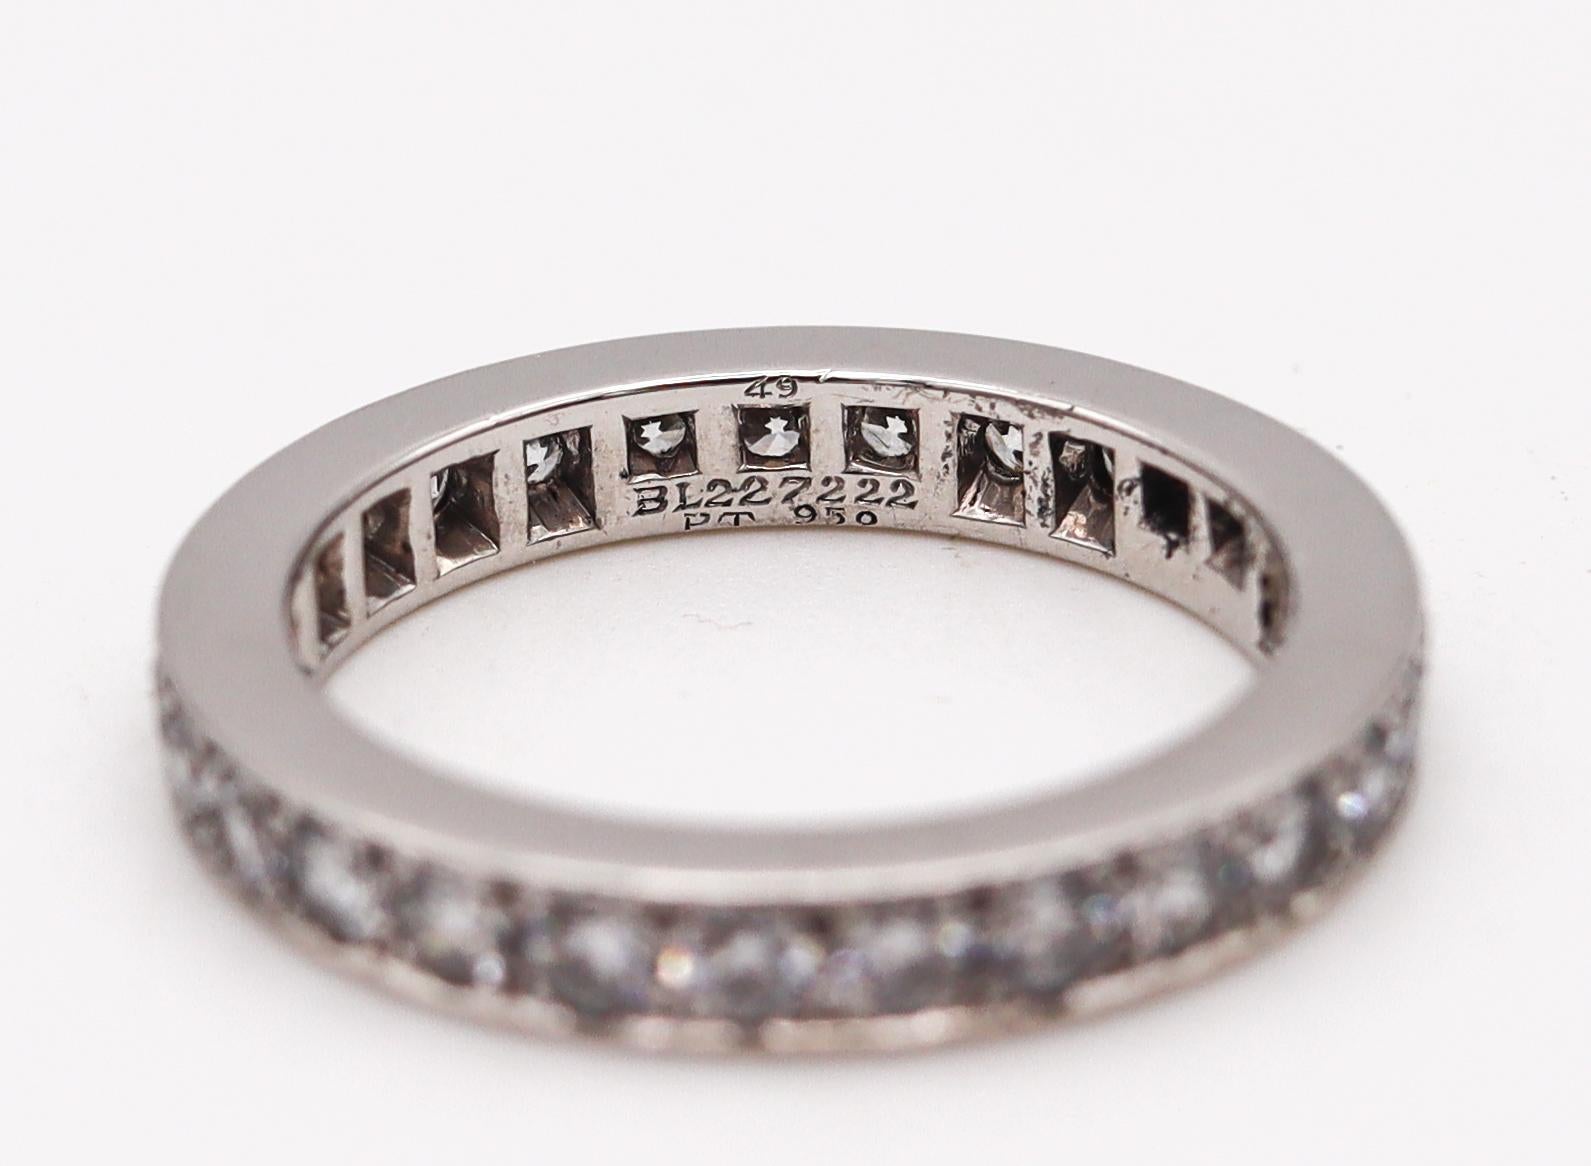 An eternity ring designed by Van Cleef & Arpels.

Beautiful contemporary eternity ring band, created in Paris France by the iconic jewelry house of Van Cleef & Arpels. This piece has been crafted in solid platinum .950/.999 with high polished finish